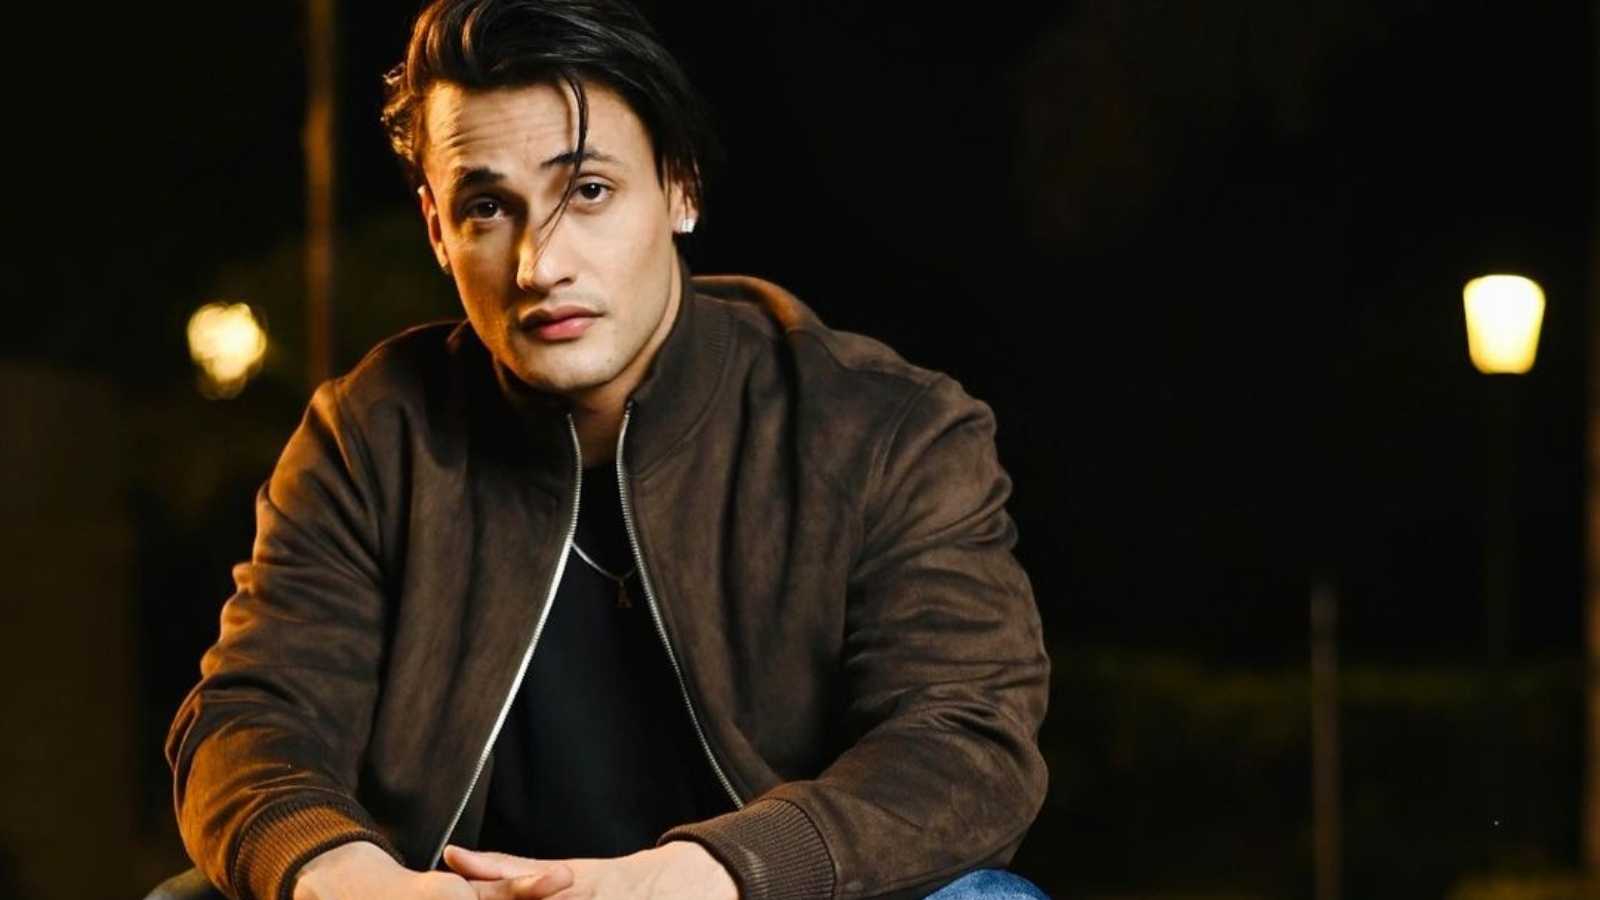 Asim Riaz drops truth bombs about reality shows Khatron Ke Khiladi, Jhalak Dikhhla Jaa to reveal why he didn't participate